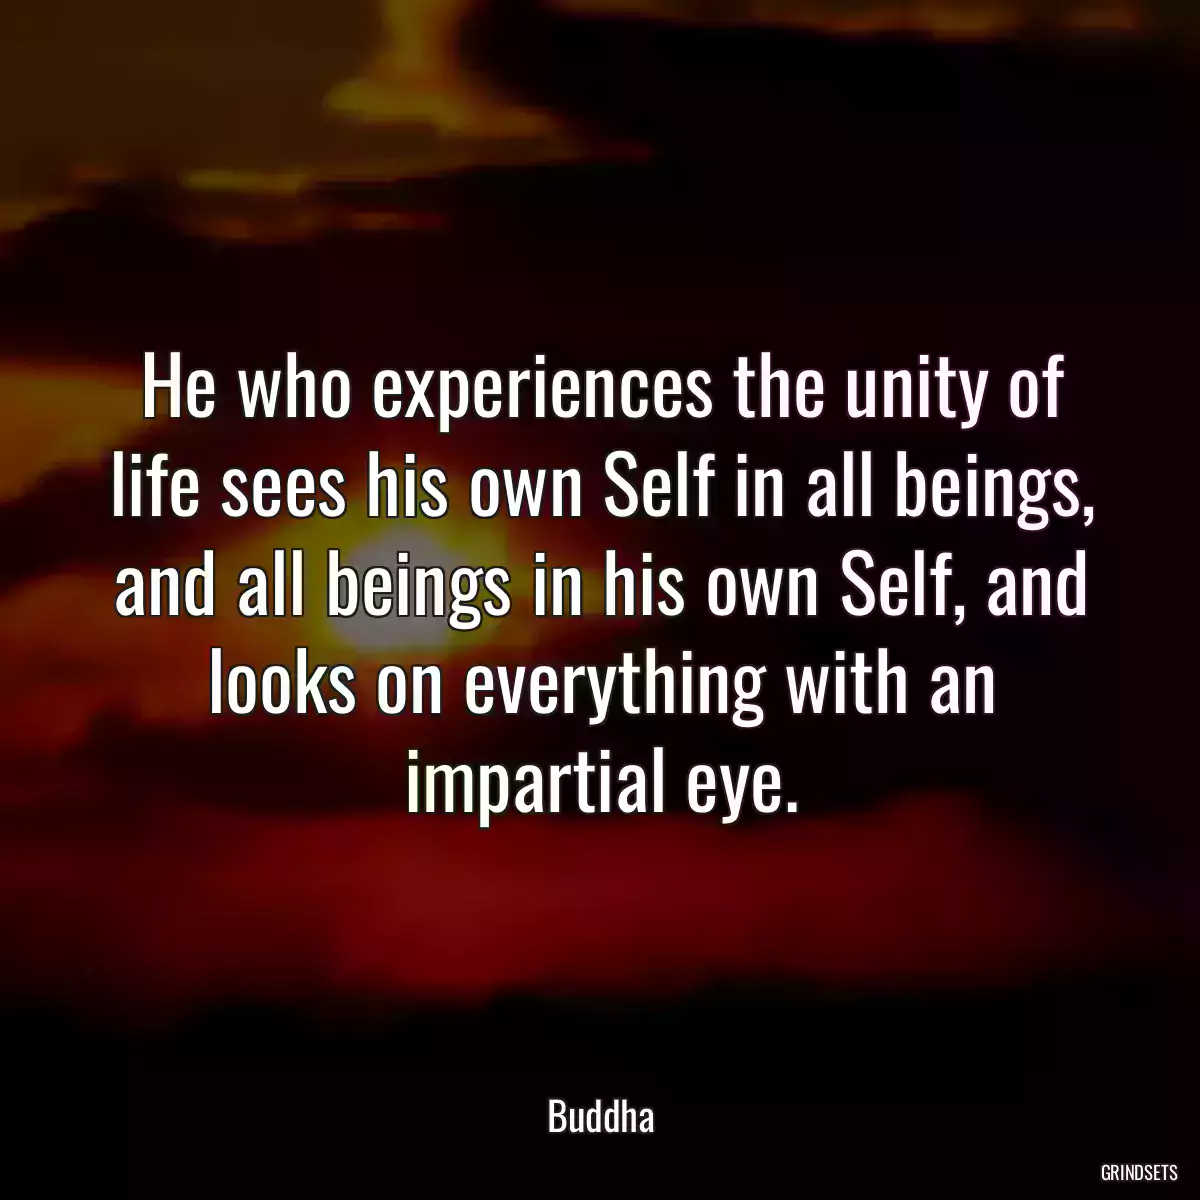 He who experiences the unity of life sees his own Self in all beings, and all beings in his own Self, and looks on everything with an impartial eye.